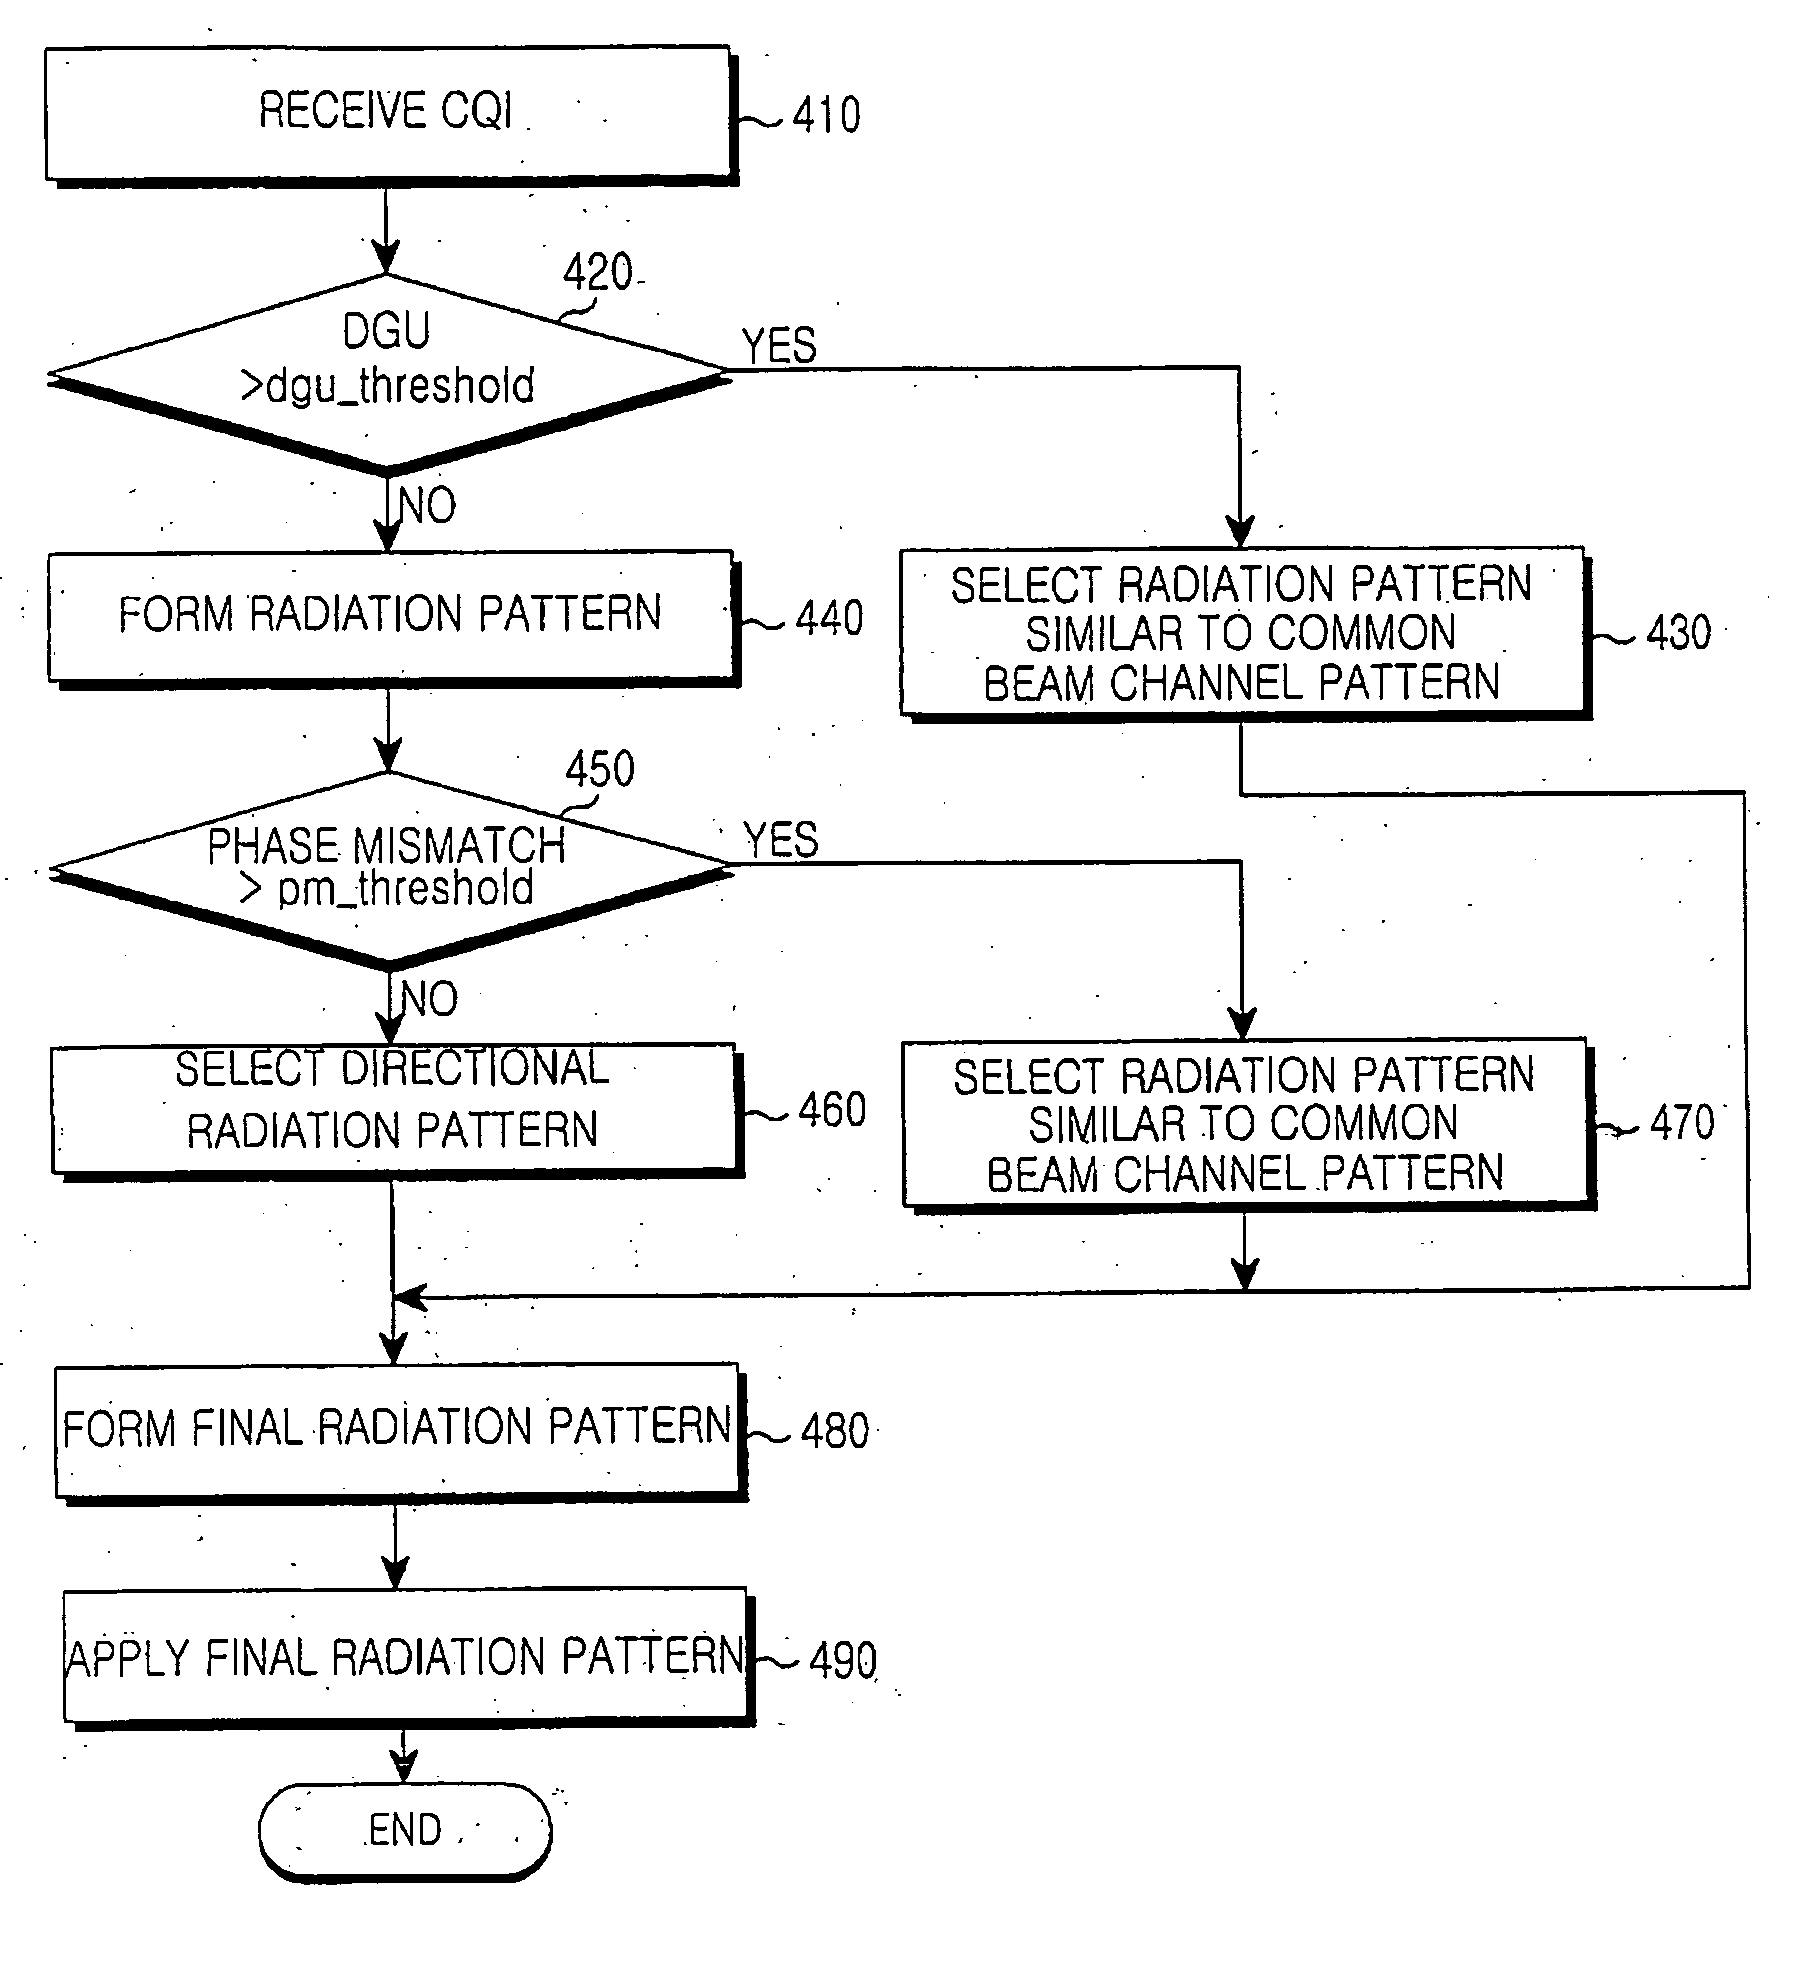 Apparatus and method for preventing call failure in an adaptive smart antenna system